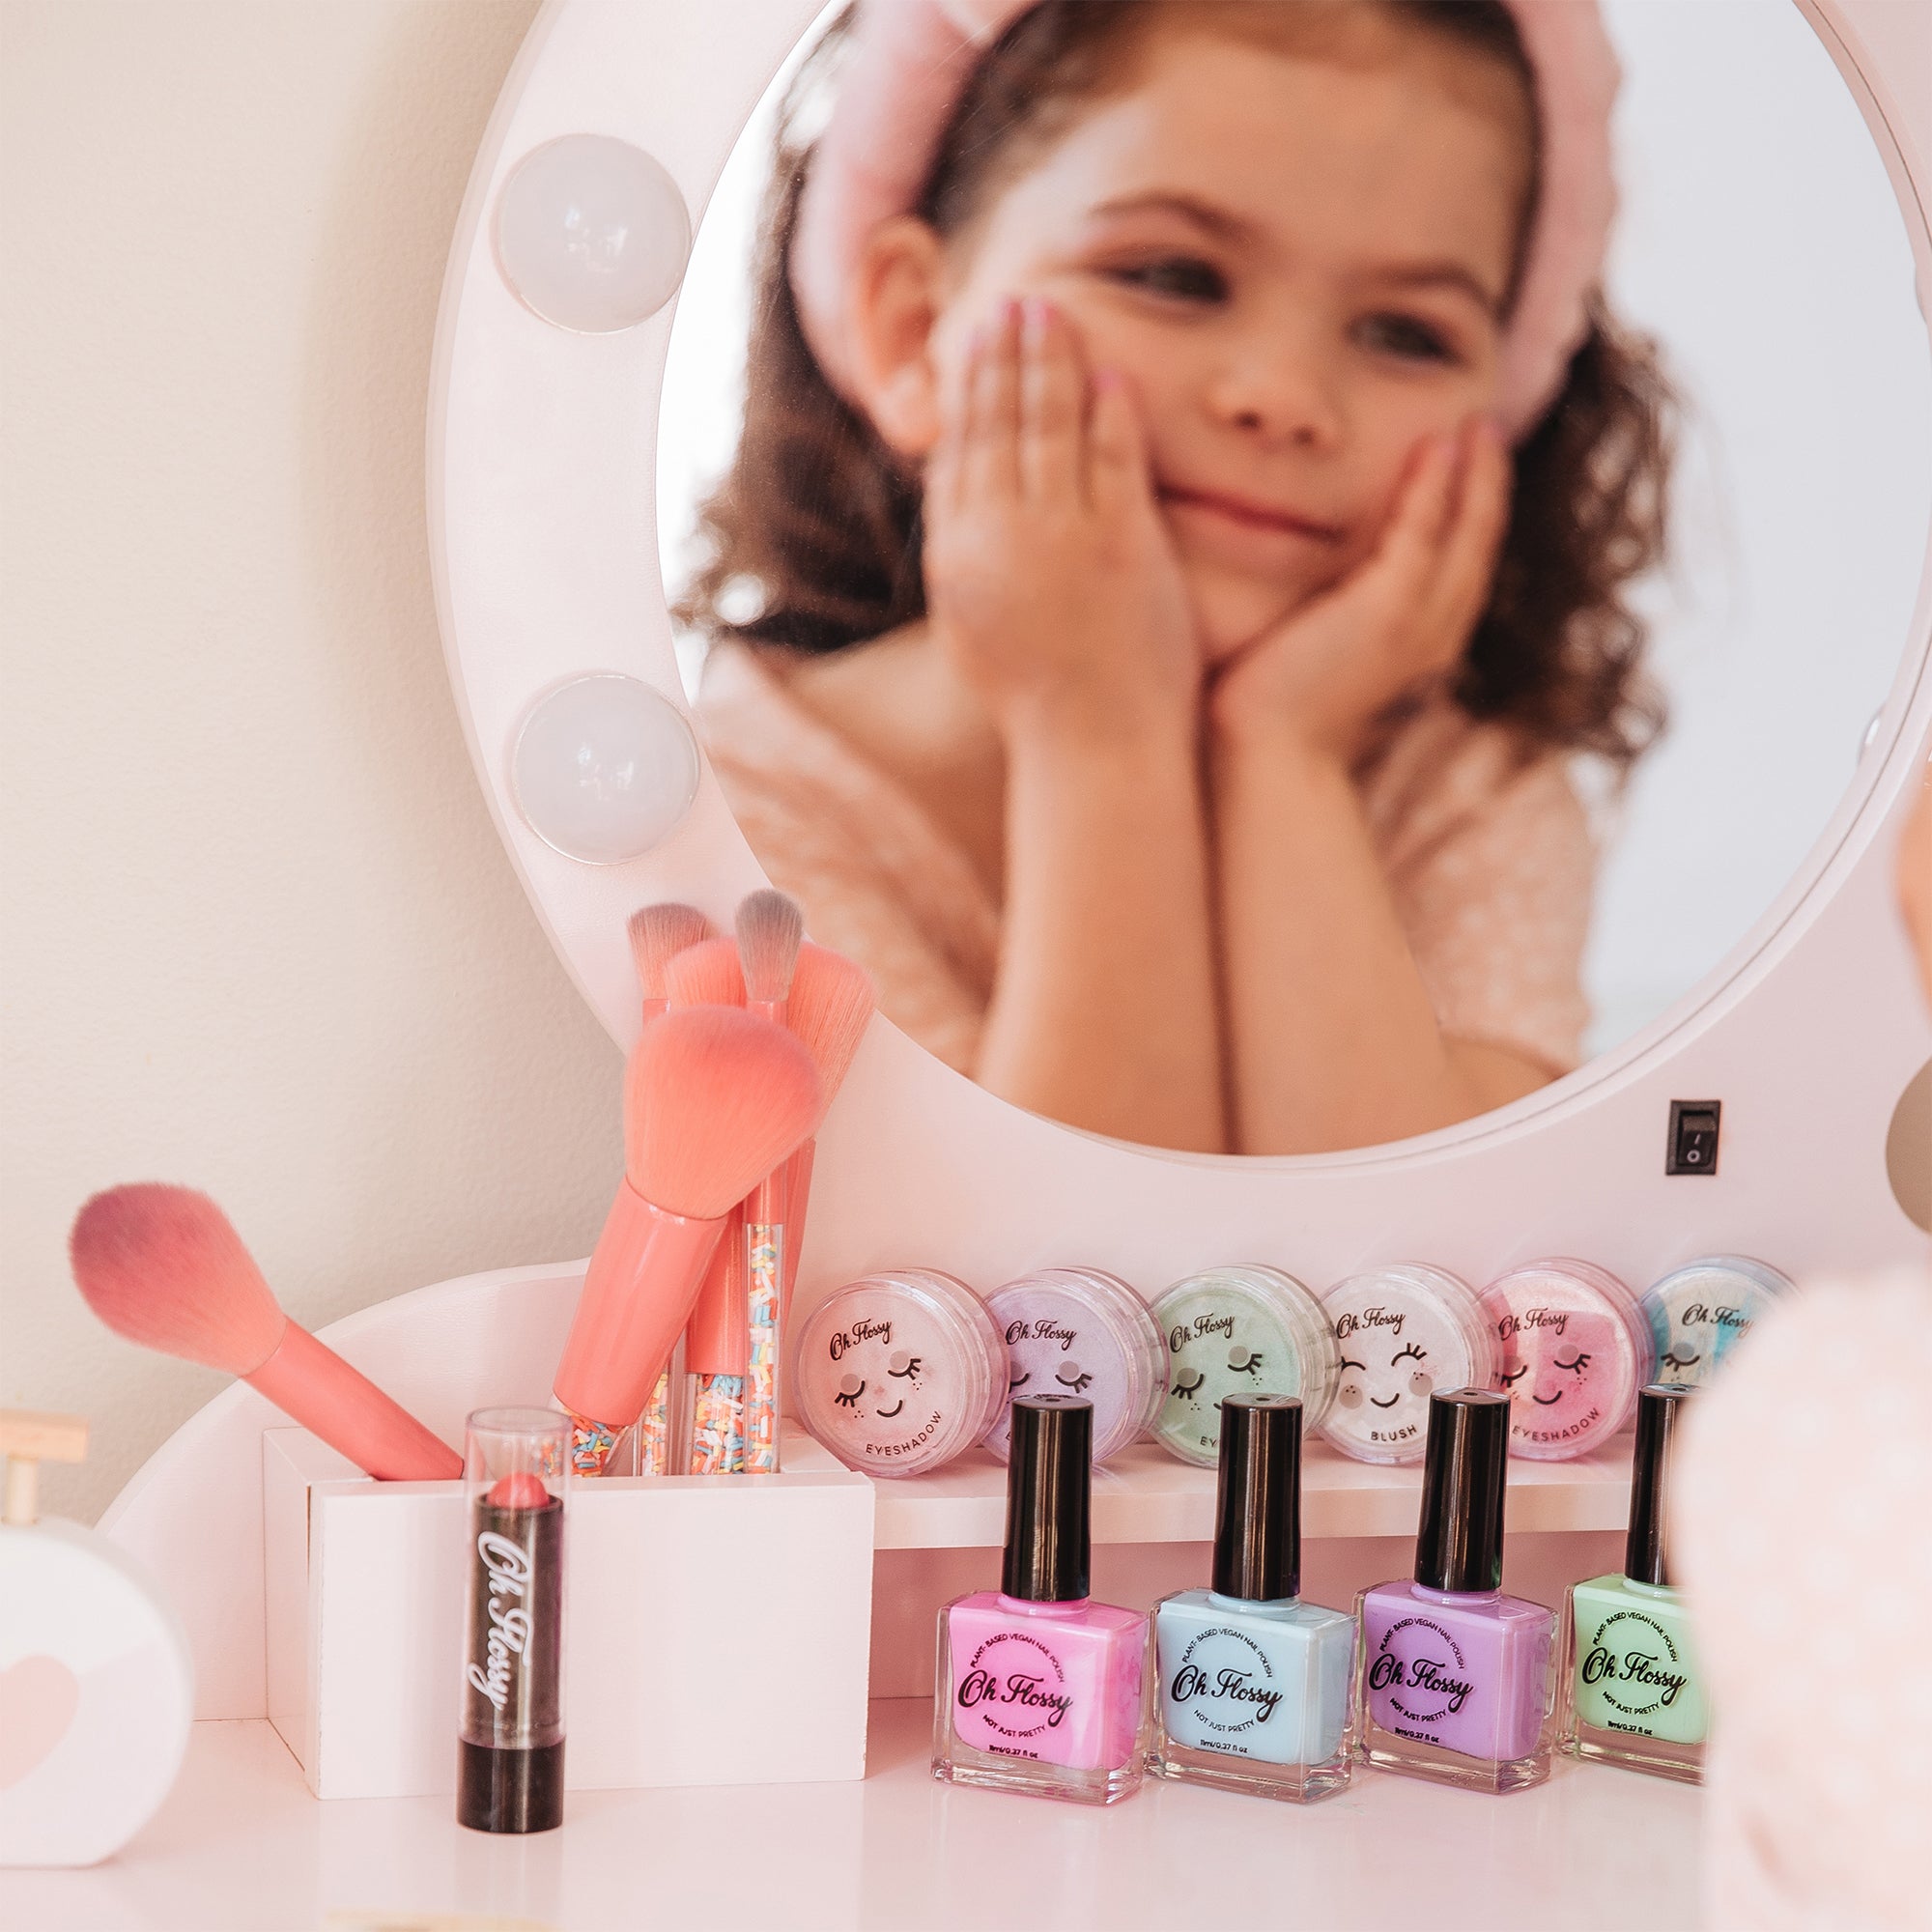 Oh Flossy Kids Natural Makeup Collection